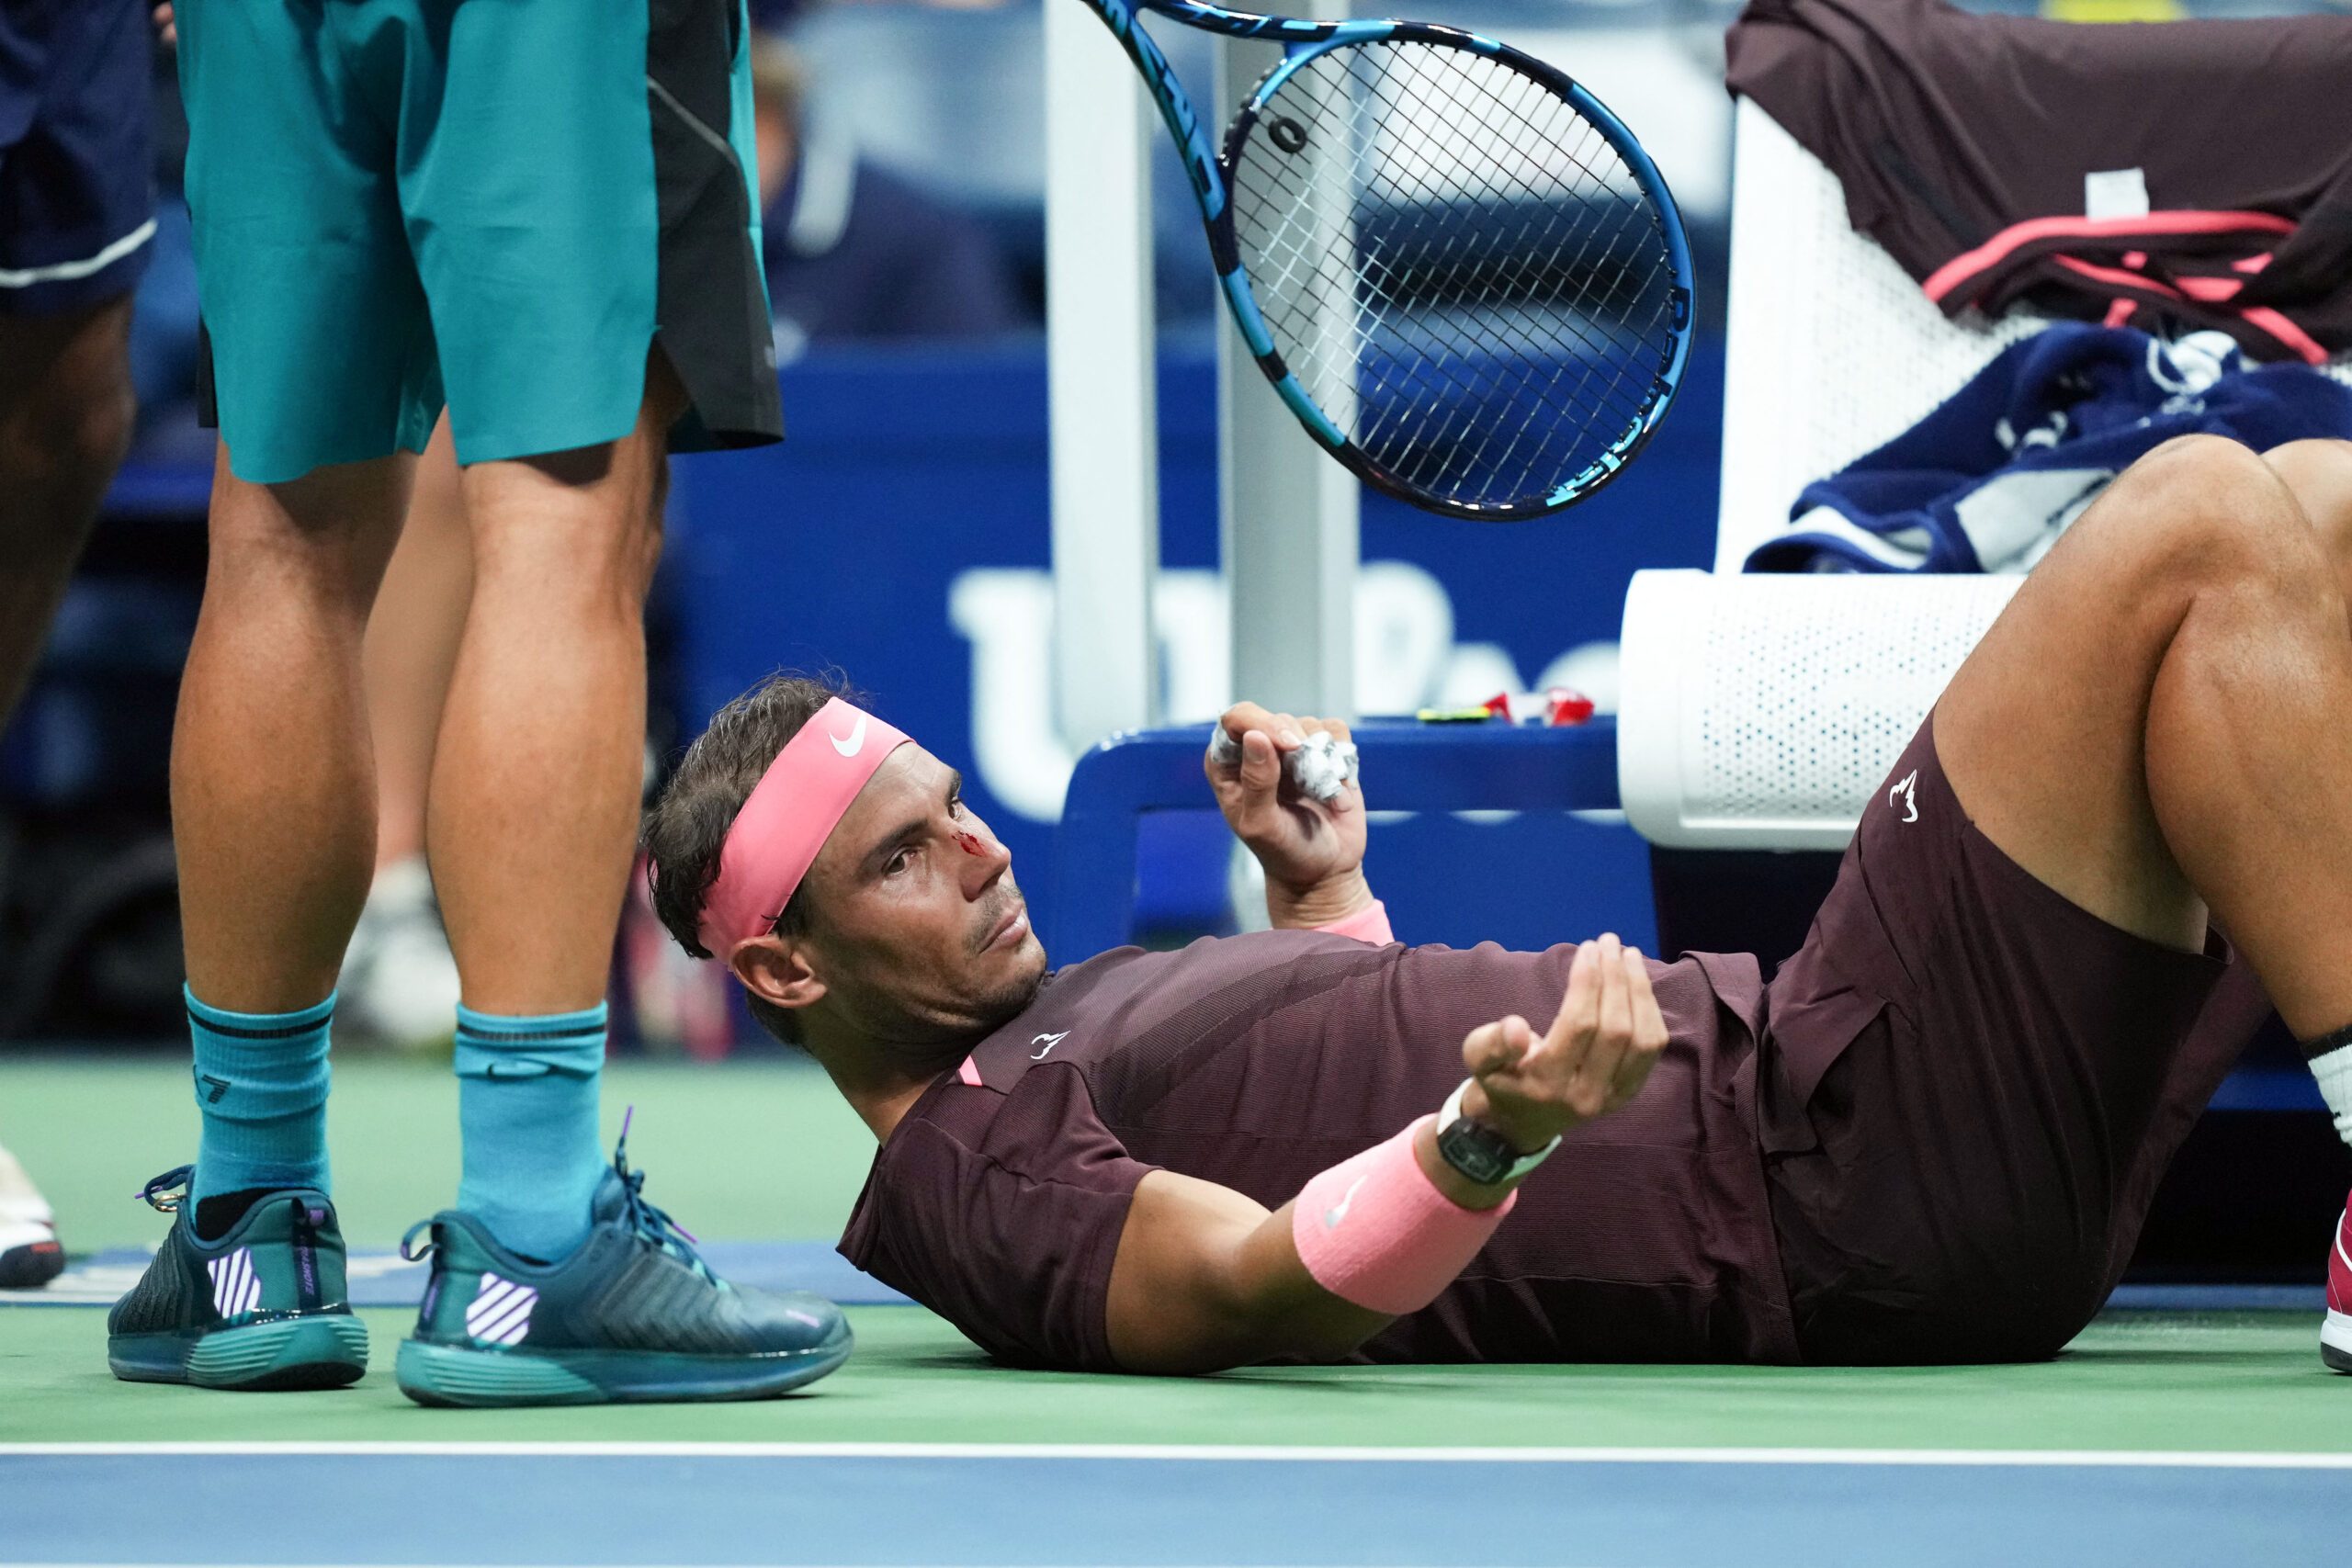 Nadal wins ugly US Open match against Fognini